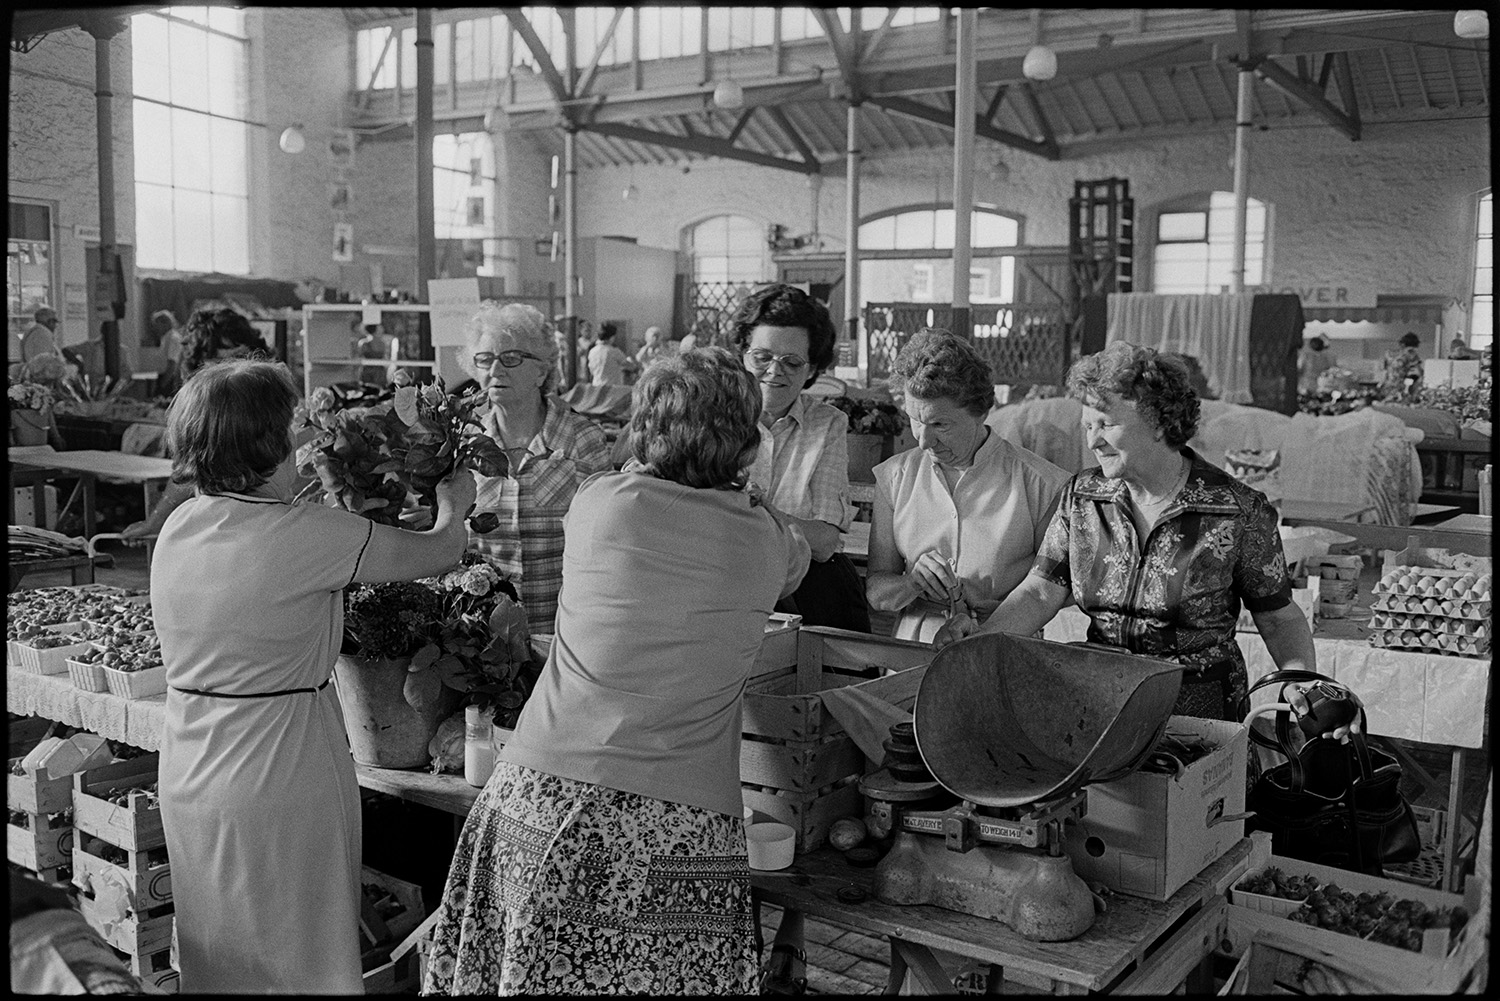 Pannier market stalls, cheese eggs, vegetables, customers. 
[Women buying flowers and vegetables from two women running a stall at Bideford Pannier Market. A set of scales can be seen on the stall. Other stalls are visible in the background, including one with eggs.]